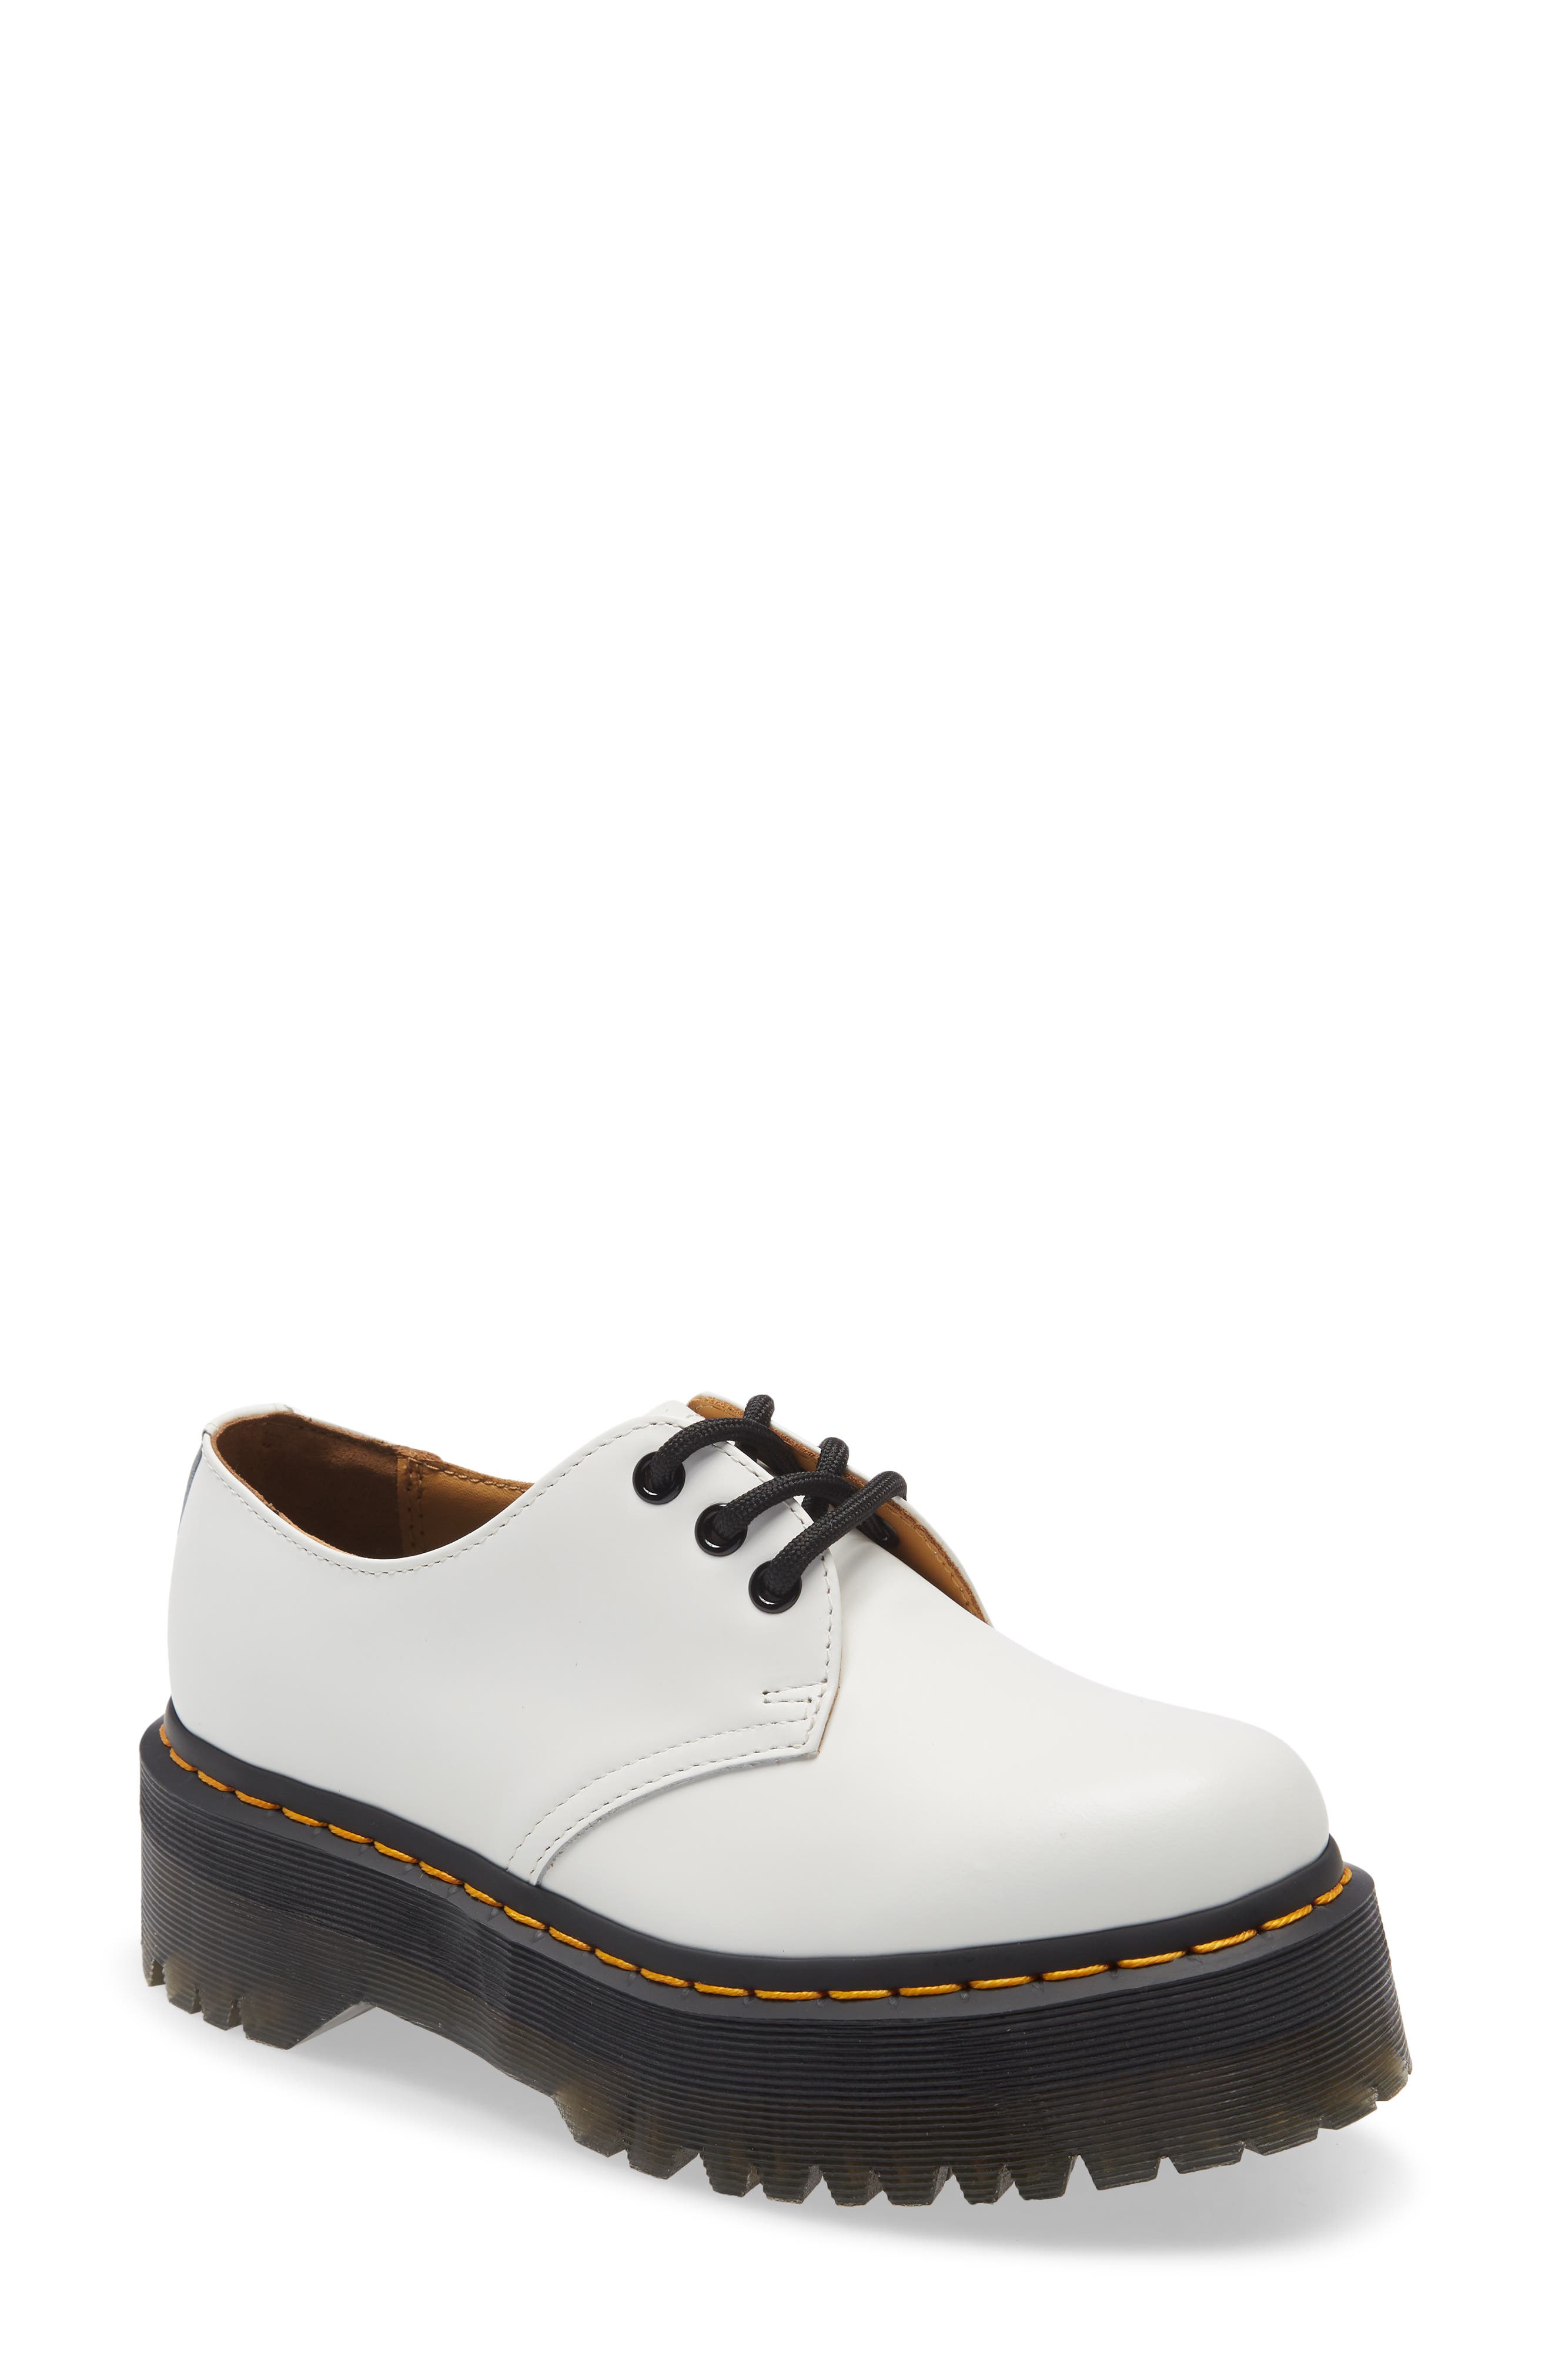 Show Shine Womens Lace Up Oxfords Shoes